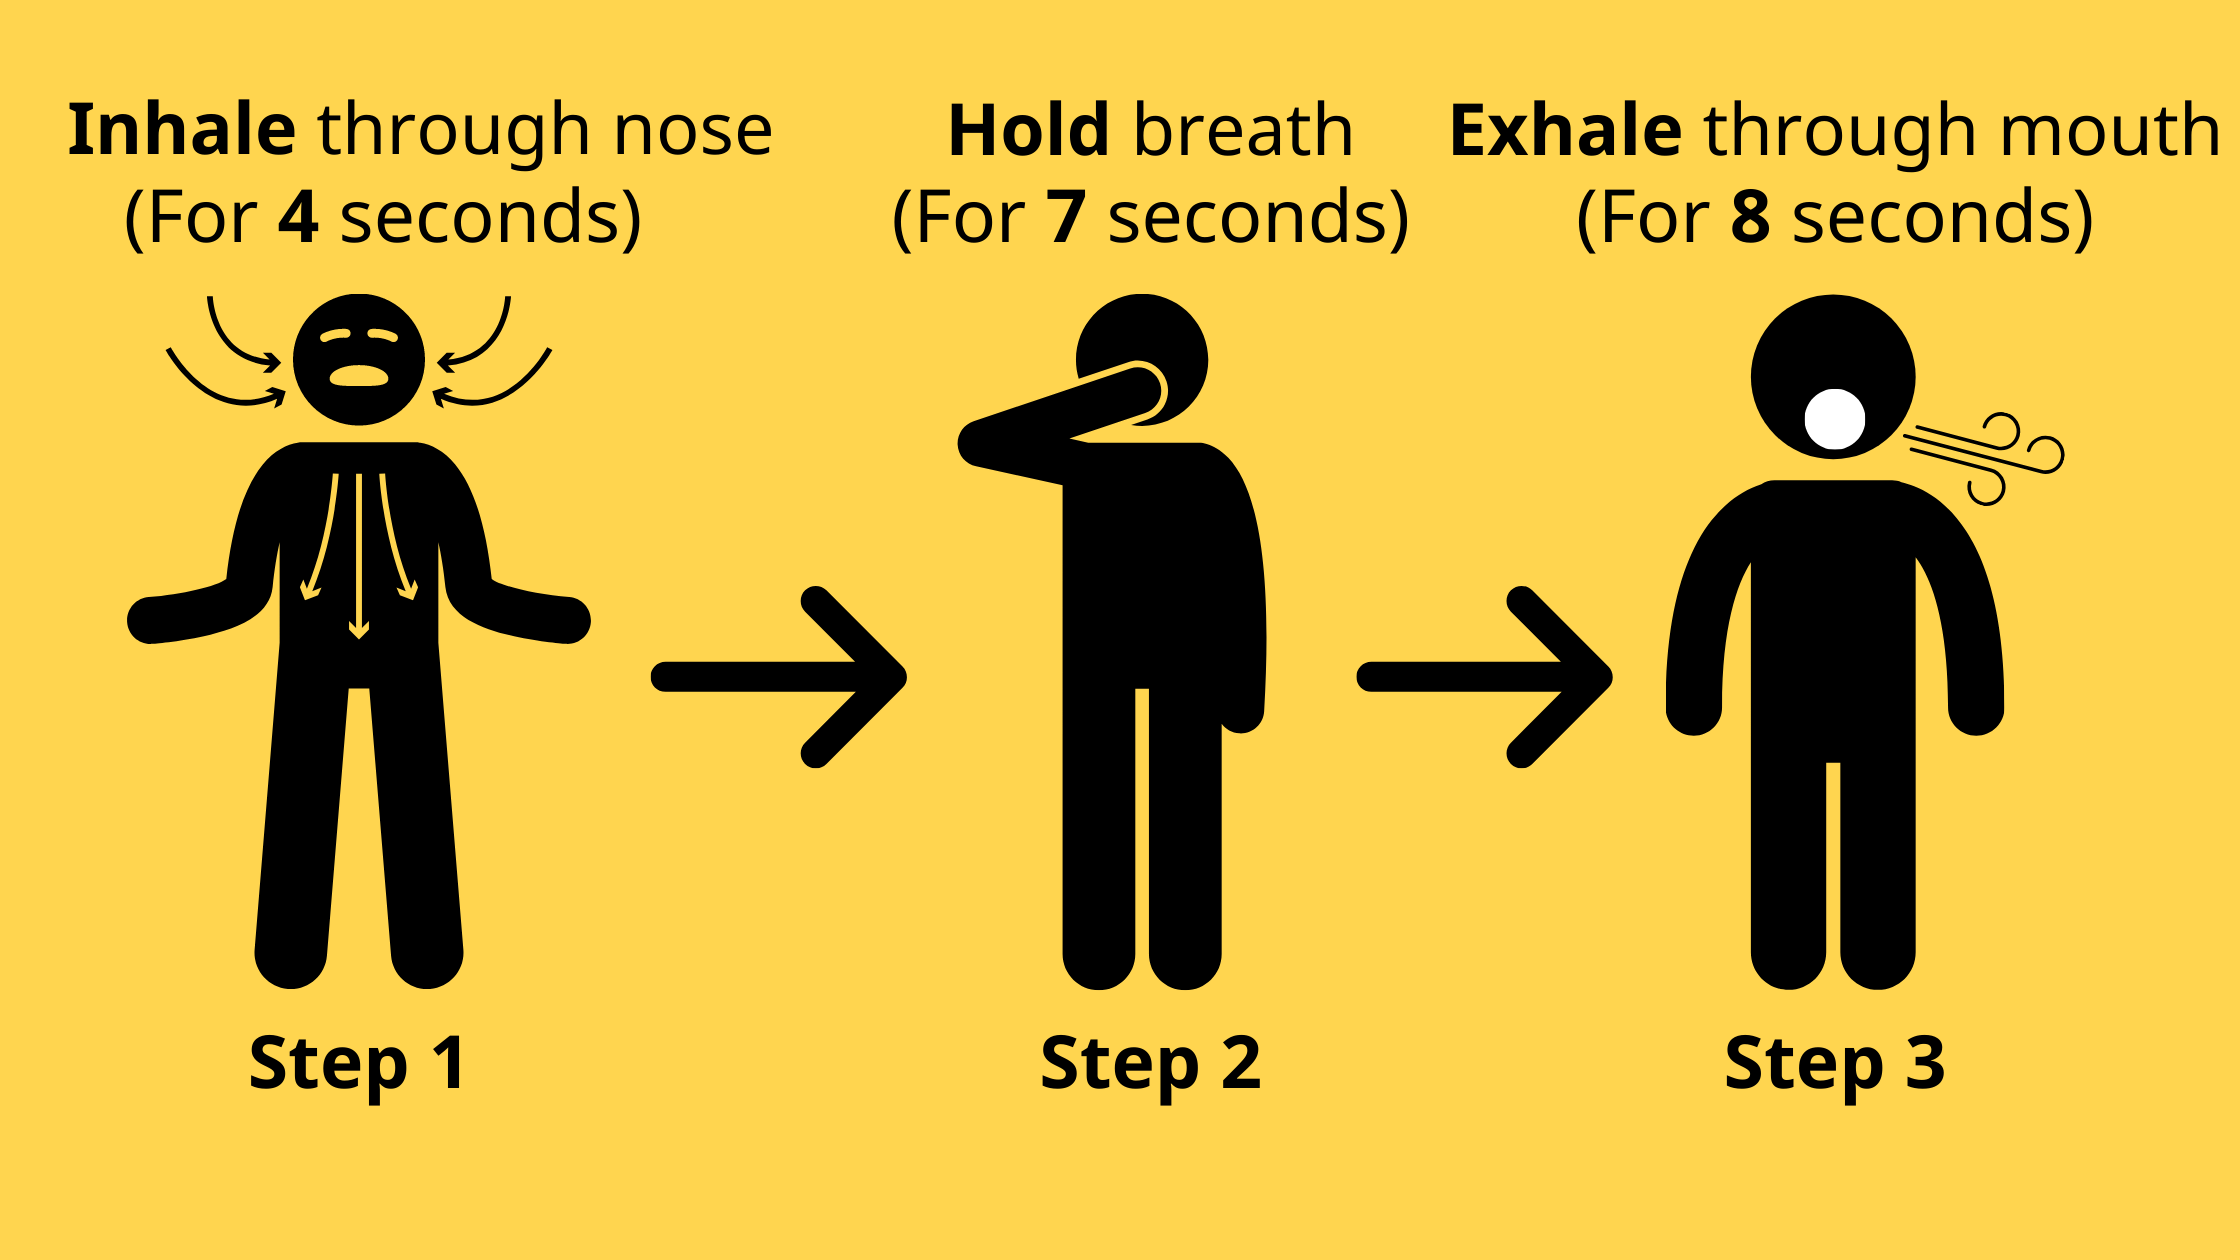  exhale for 8 seconds).